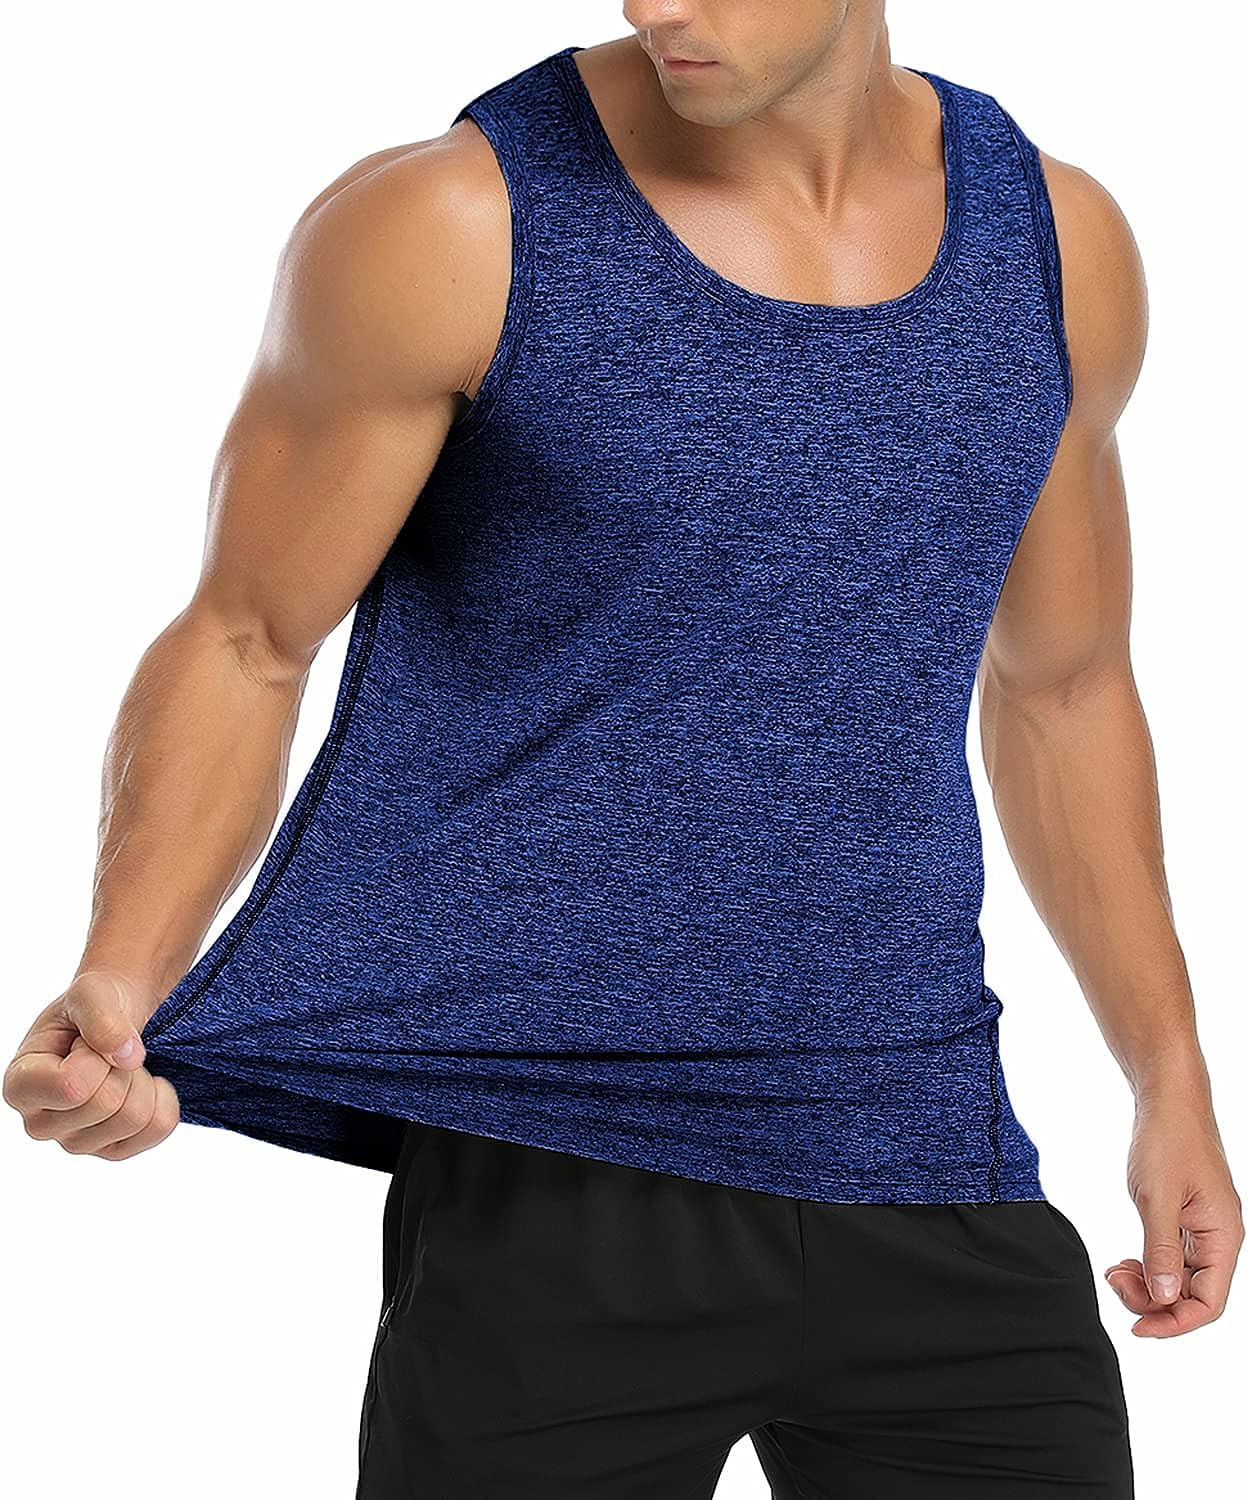 Babioboa Men's 2 Pack Workout Tank Tops Gym Athletic Sleeveless T-Shirts Fitness Bodybuilding Muscle Shirt